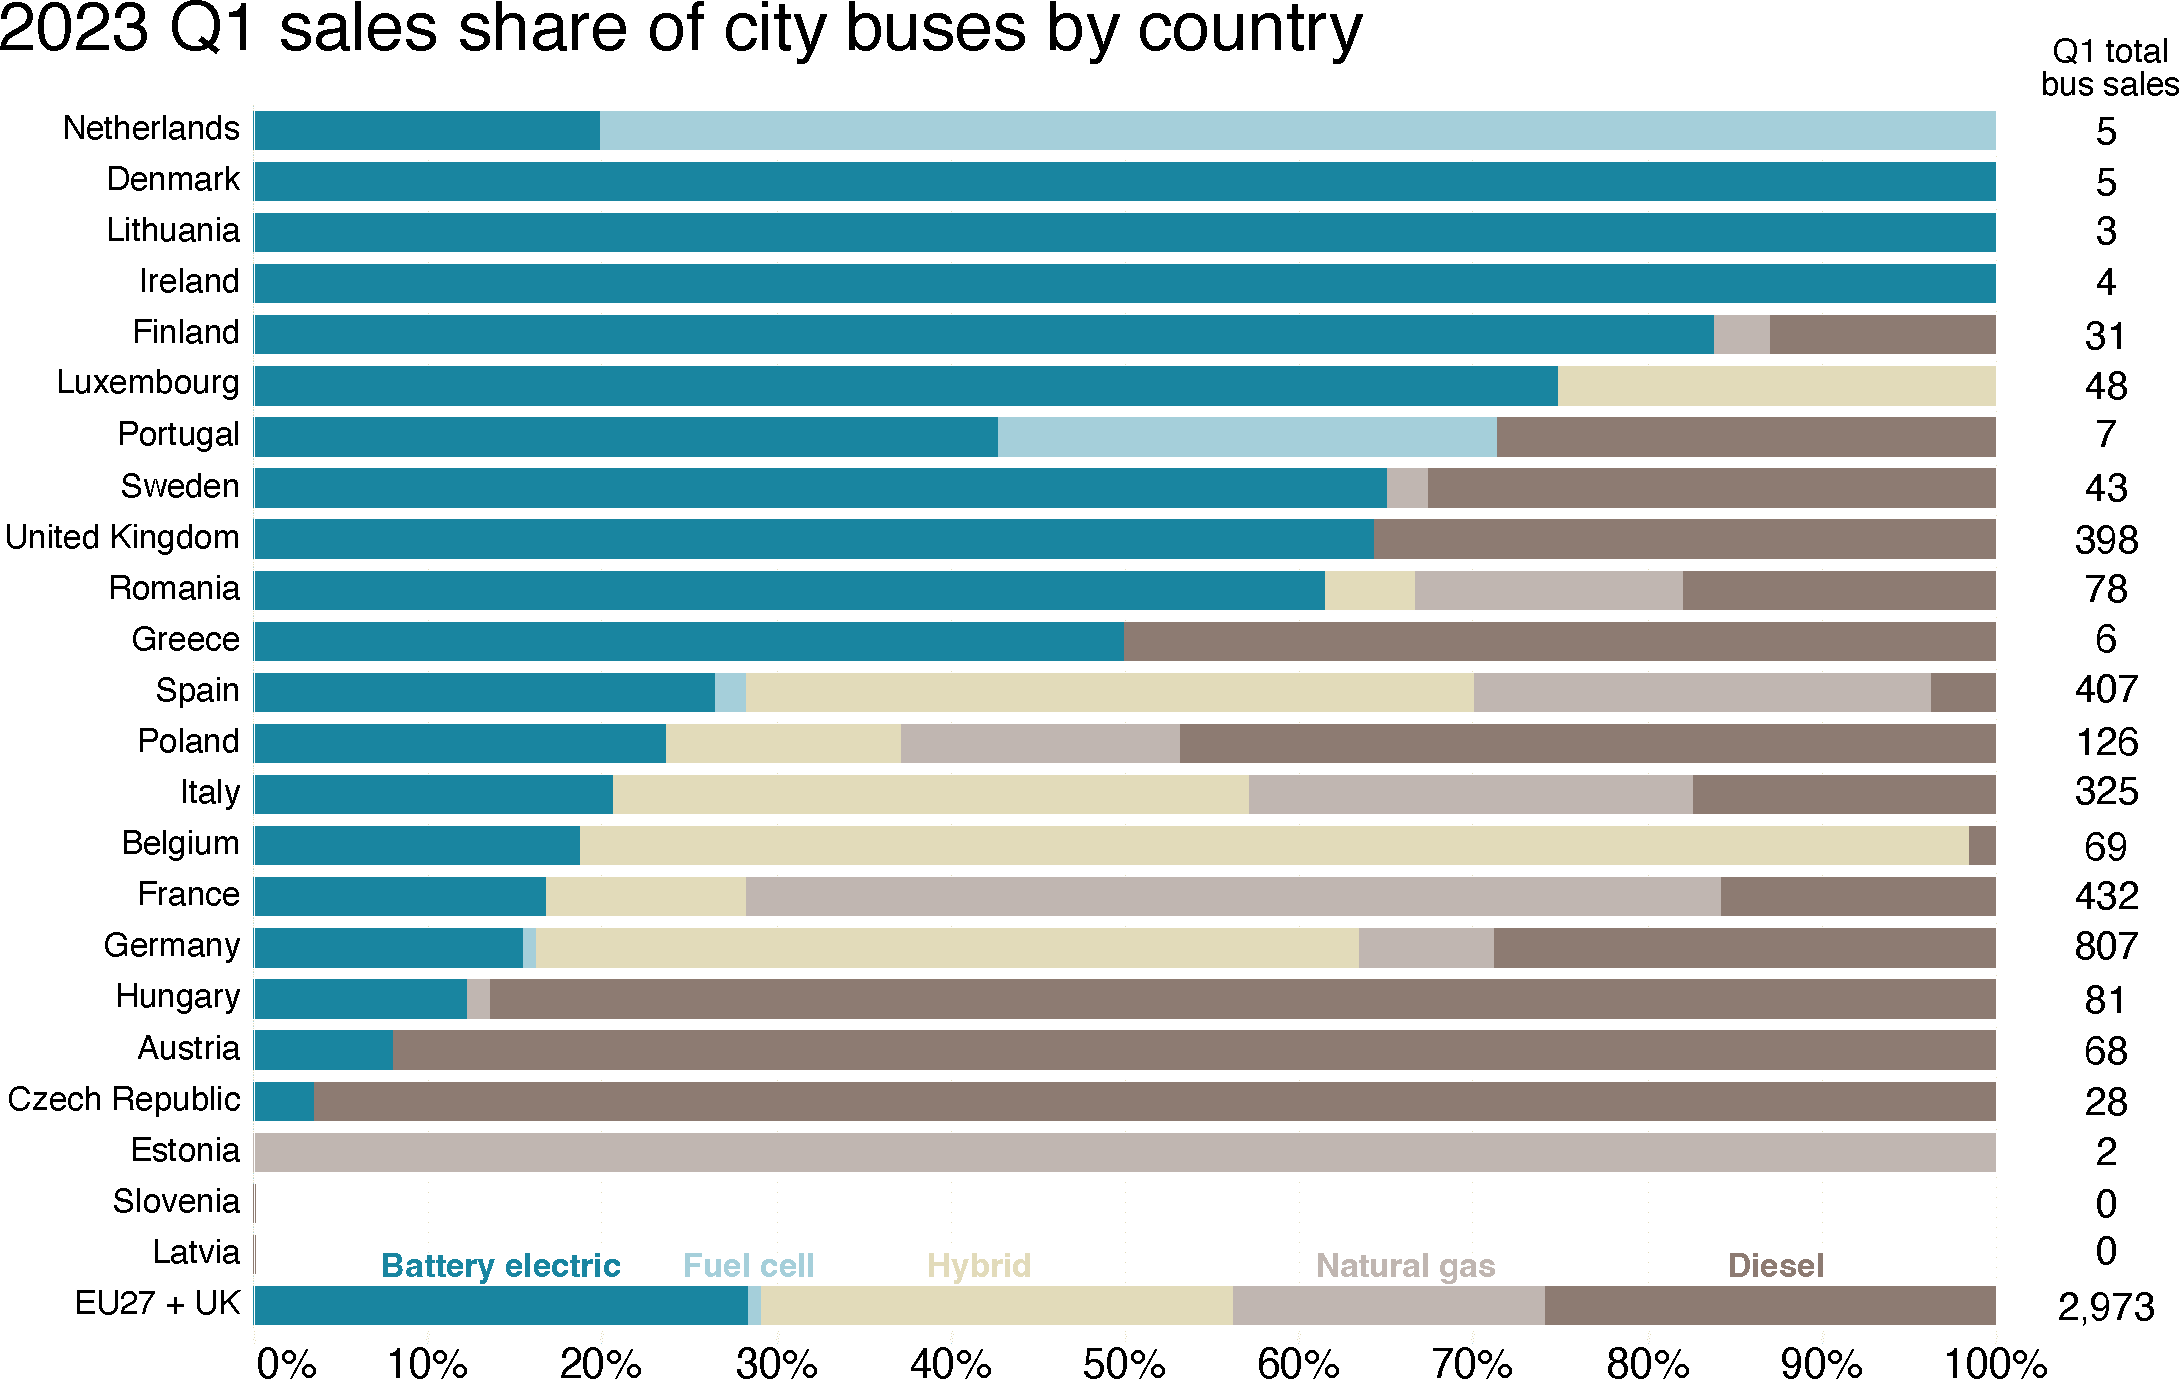 chart showing Q1 2023 sales share of city buses by country